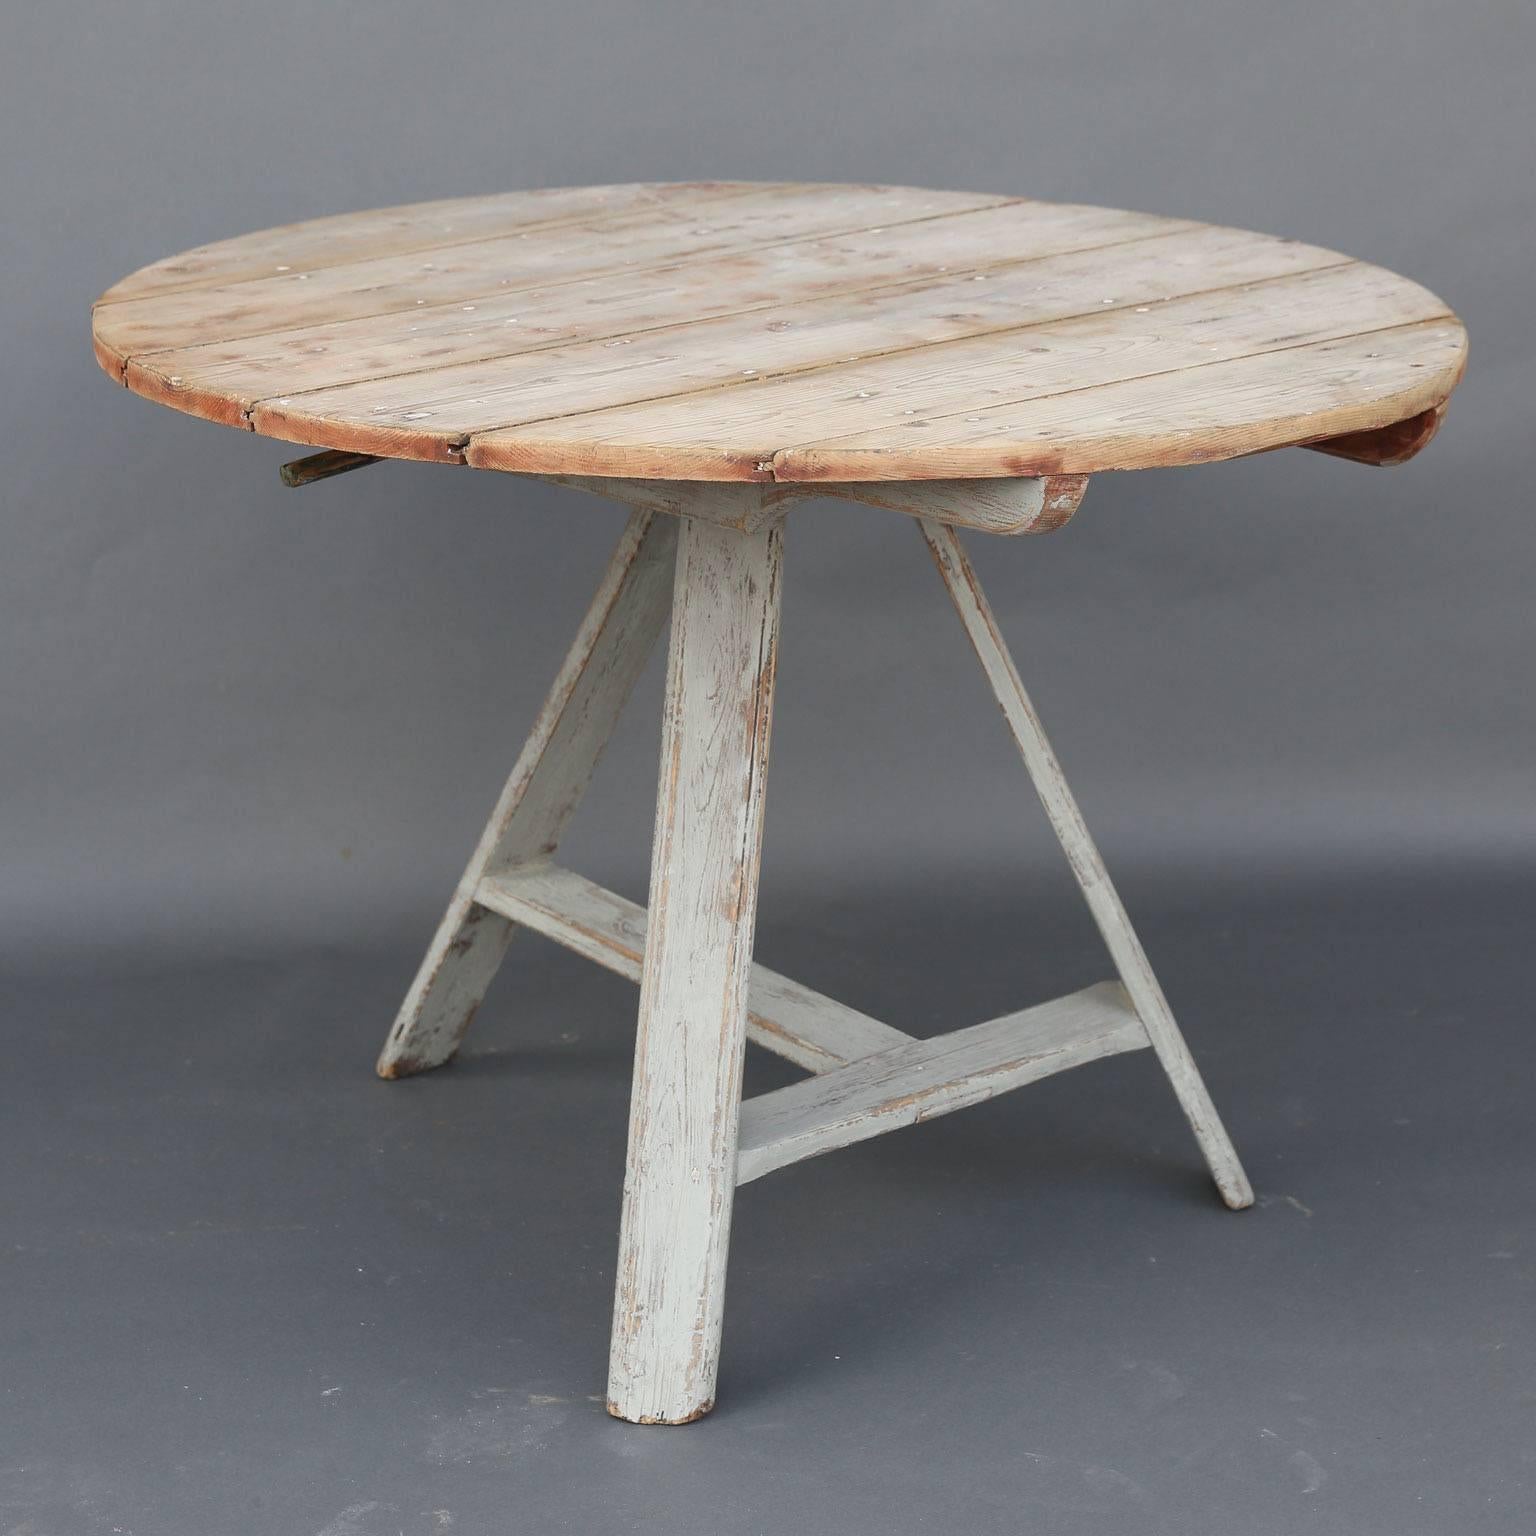 Dutch tilt-top table with painted tripod leg base and scrubbed round wood top, circa 1900.